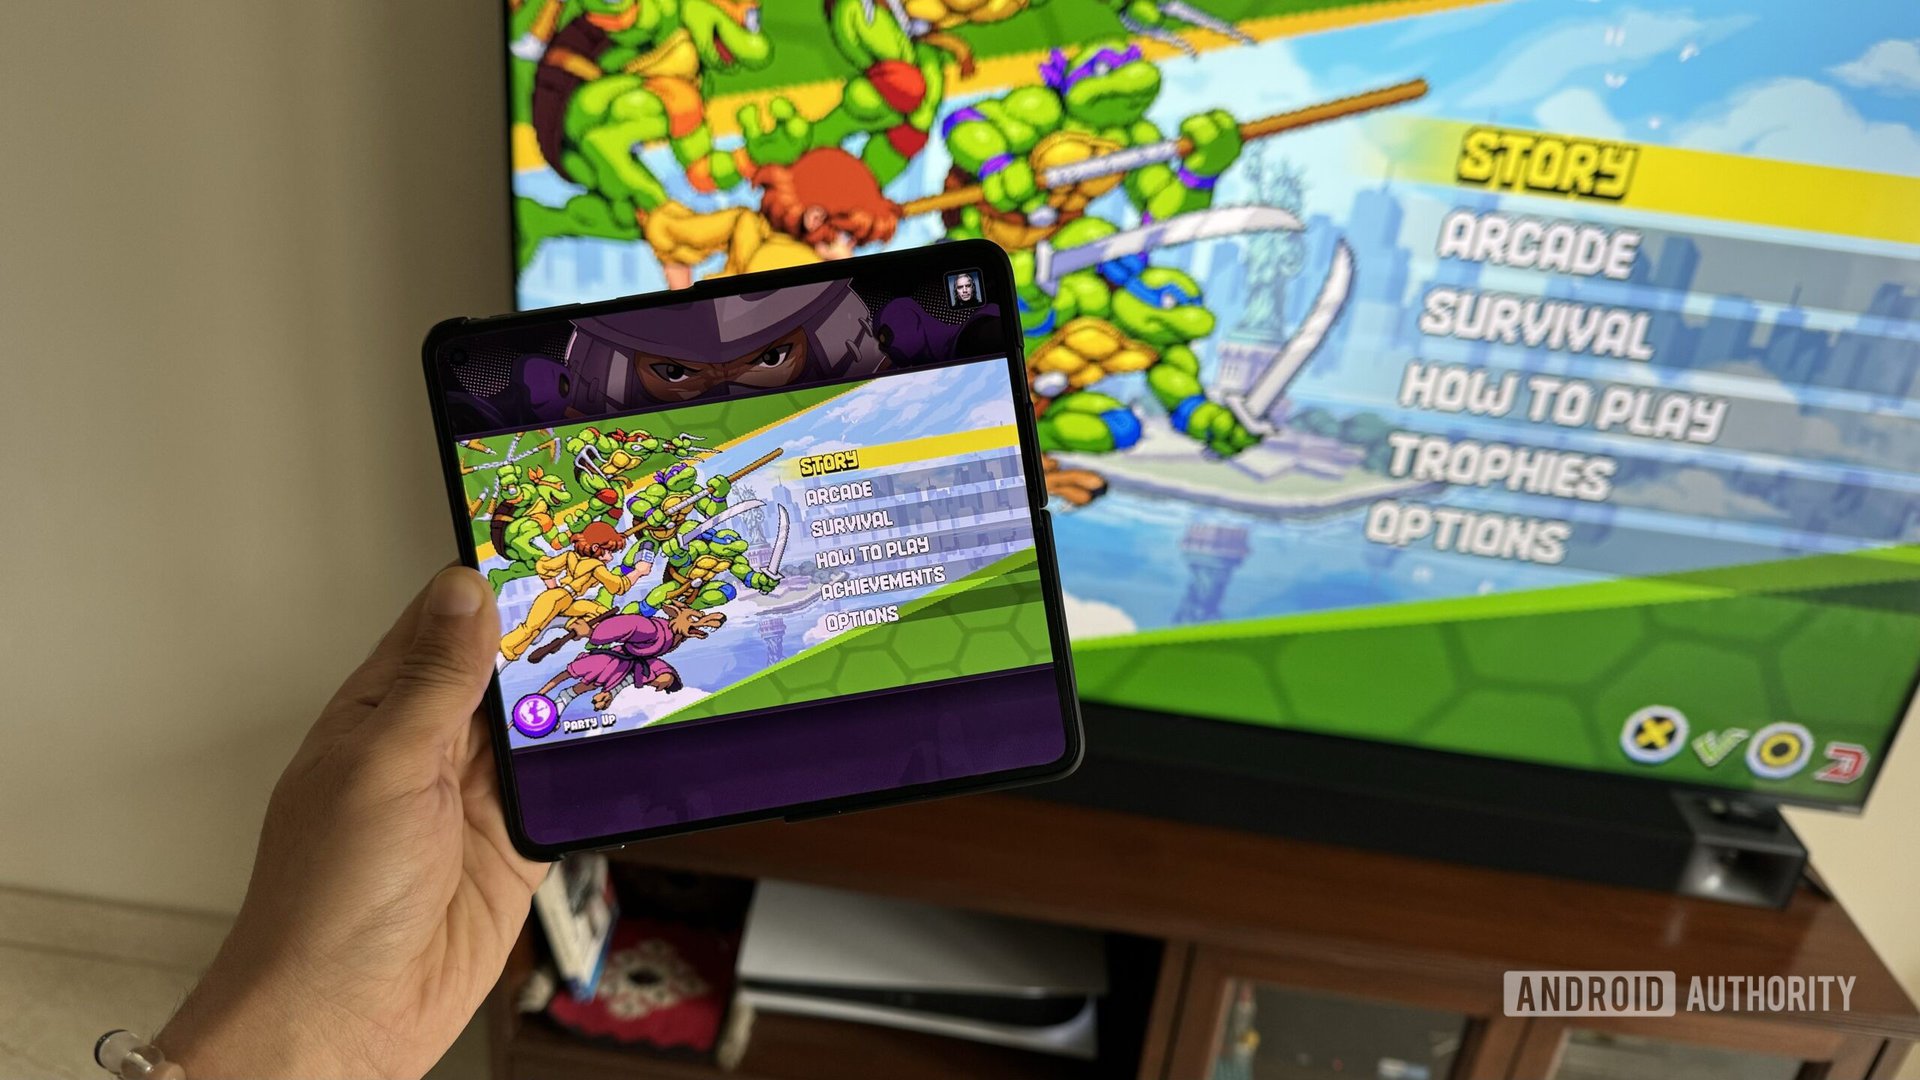 Ninja Turtles netflix game on a OnePlus Open against a PlayStation